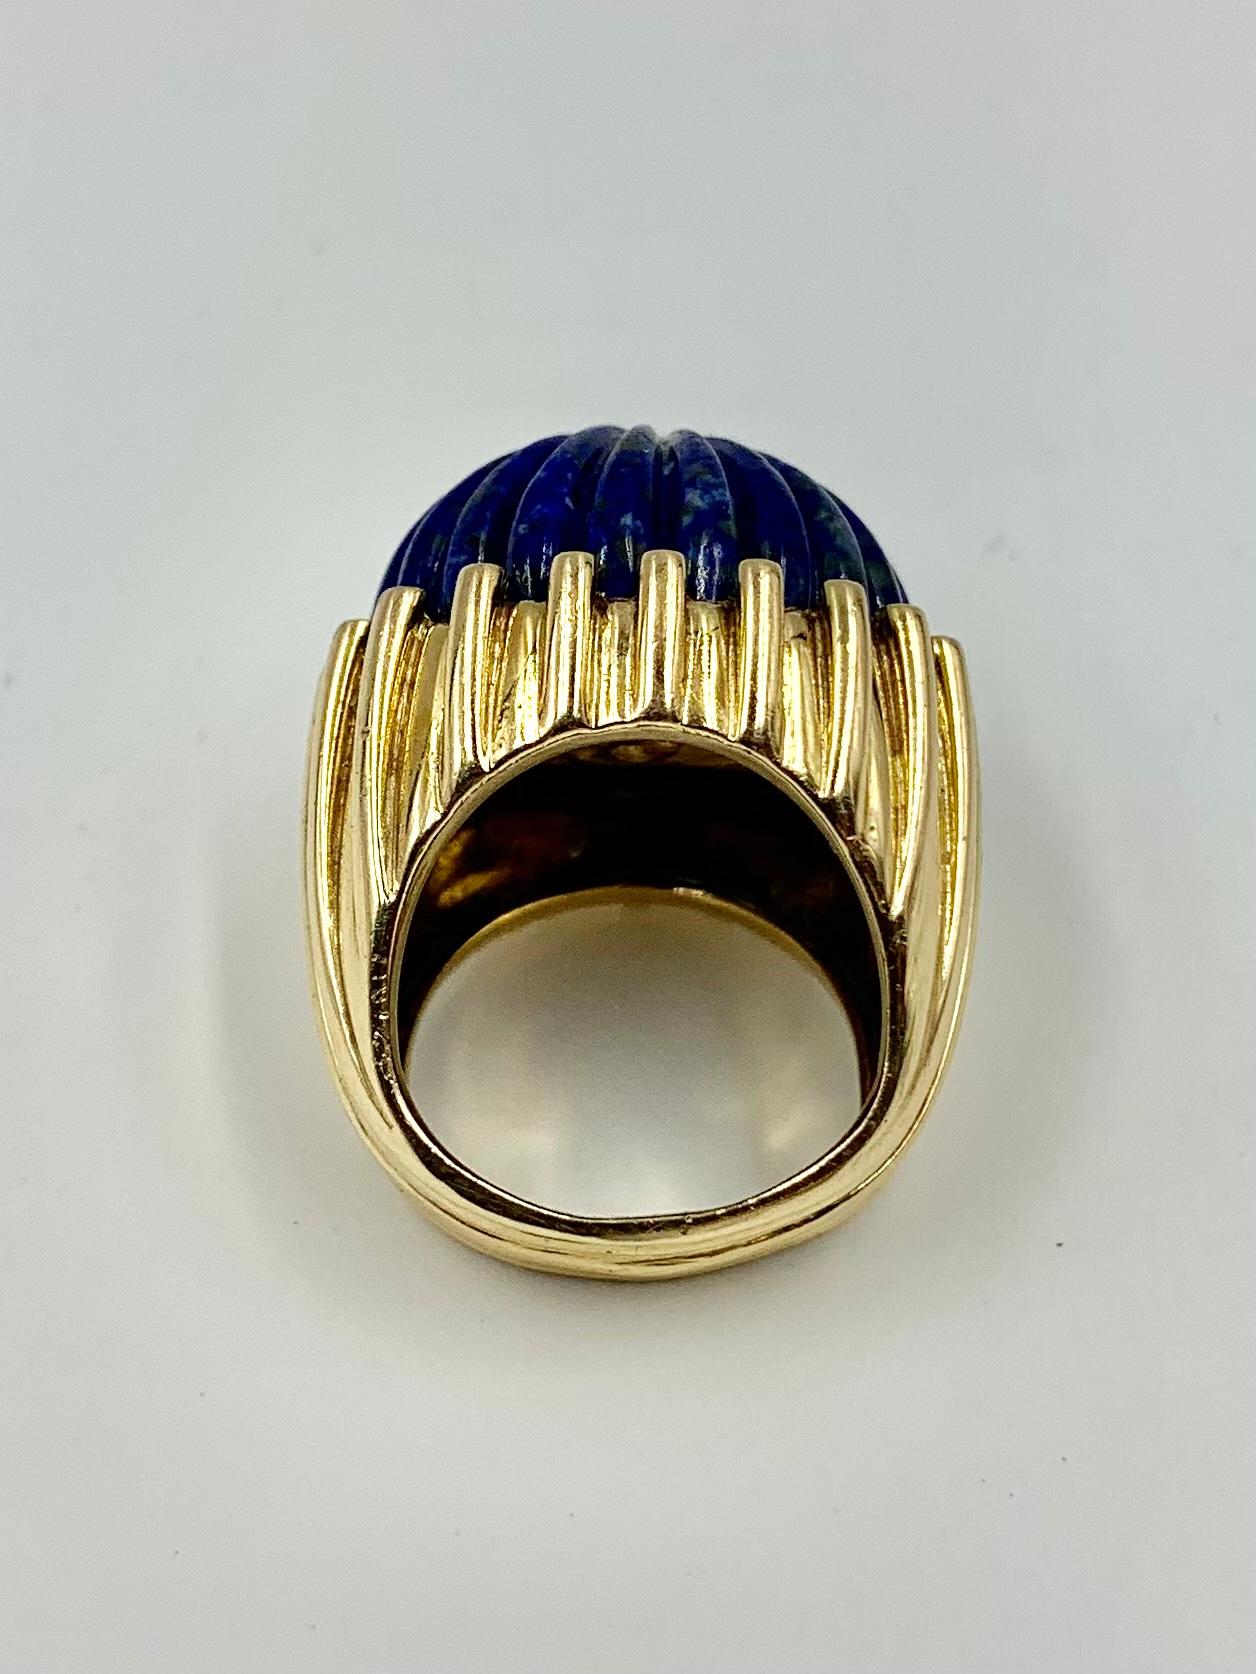 Large Estate Carved Lapis Lazuli Fluted 14K Yellow Gold Cocktail Ring, 1980's For Sale 4